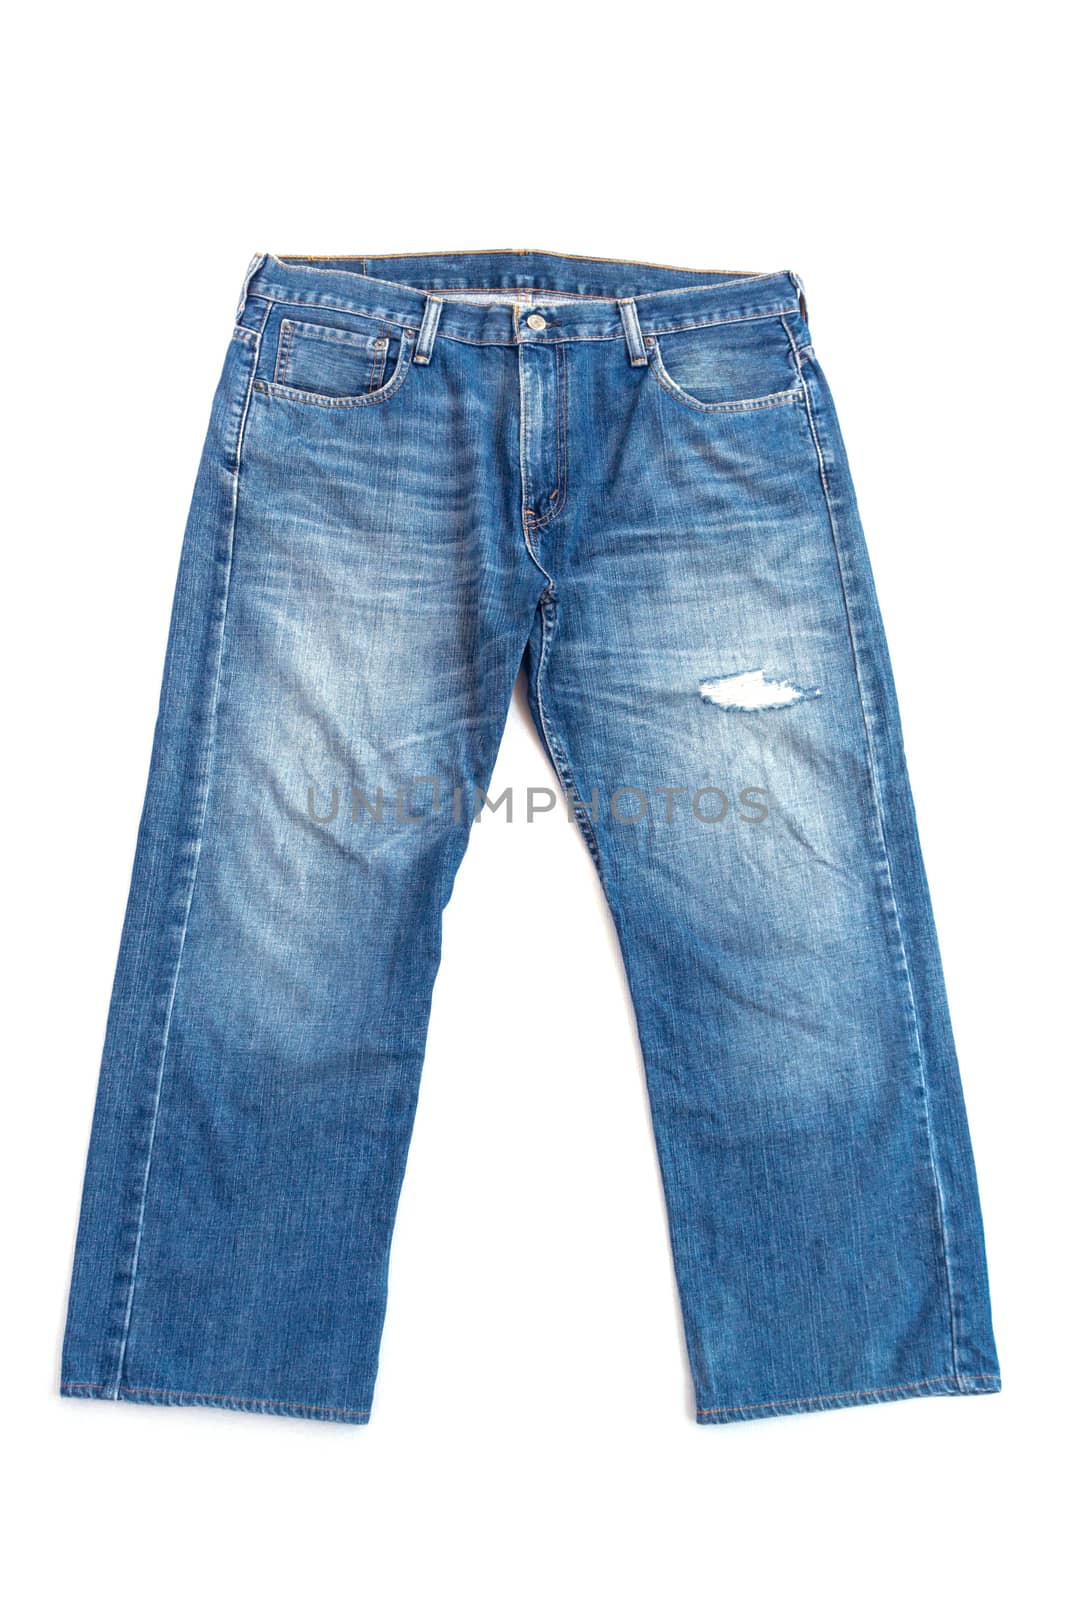 front blue jeans isolated on white background